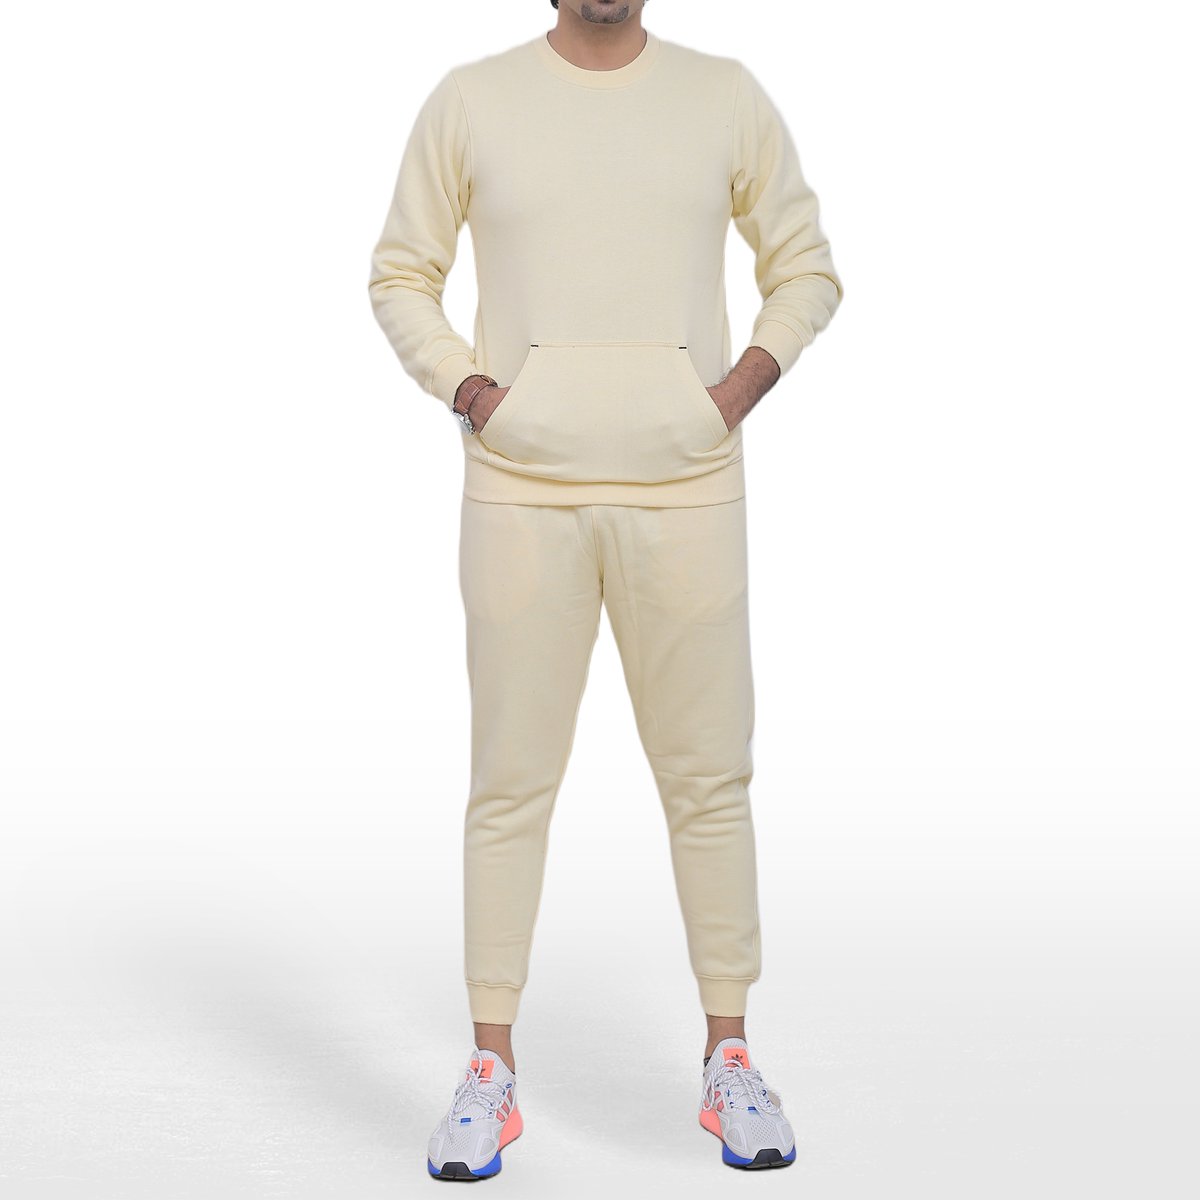 ICONICX Mens Plain Tracksuit Fleece Pullover Sweatshirt with Trousers Cotton Jogging Suit Exercise, Fitness, Boxing MMA, Cream